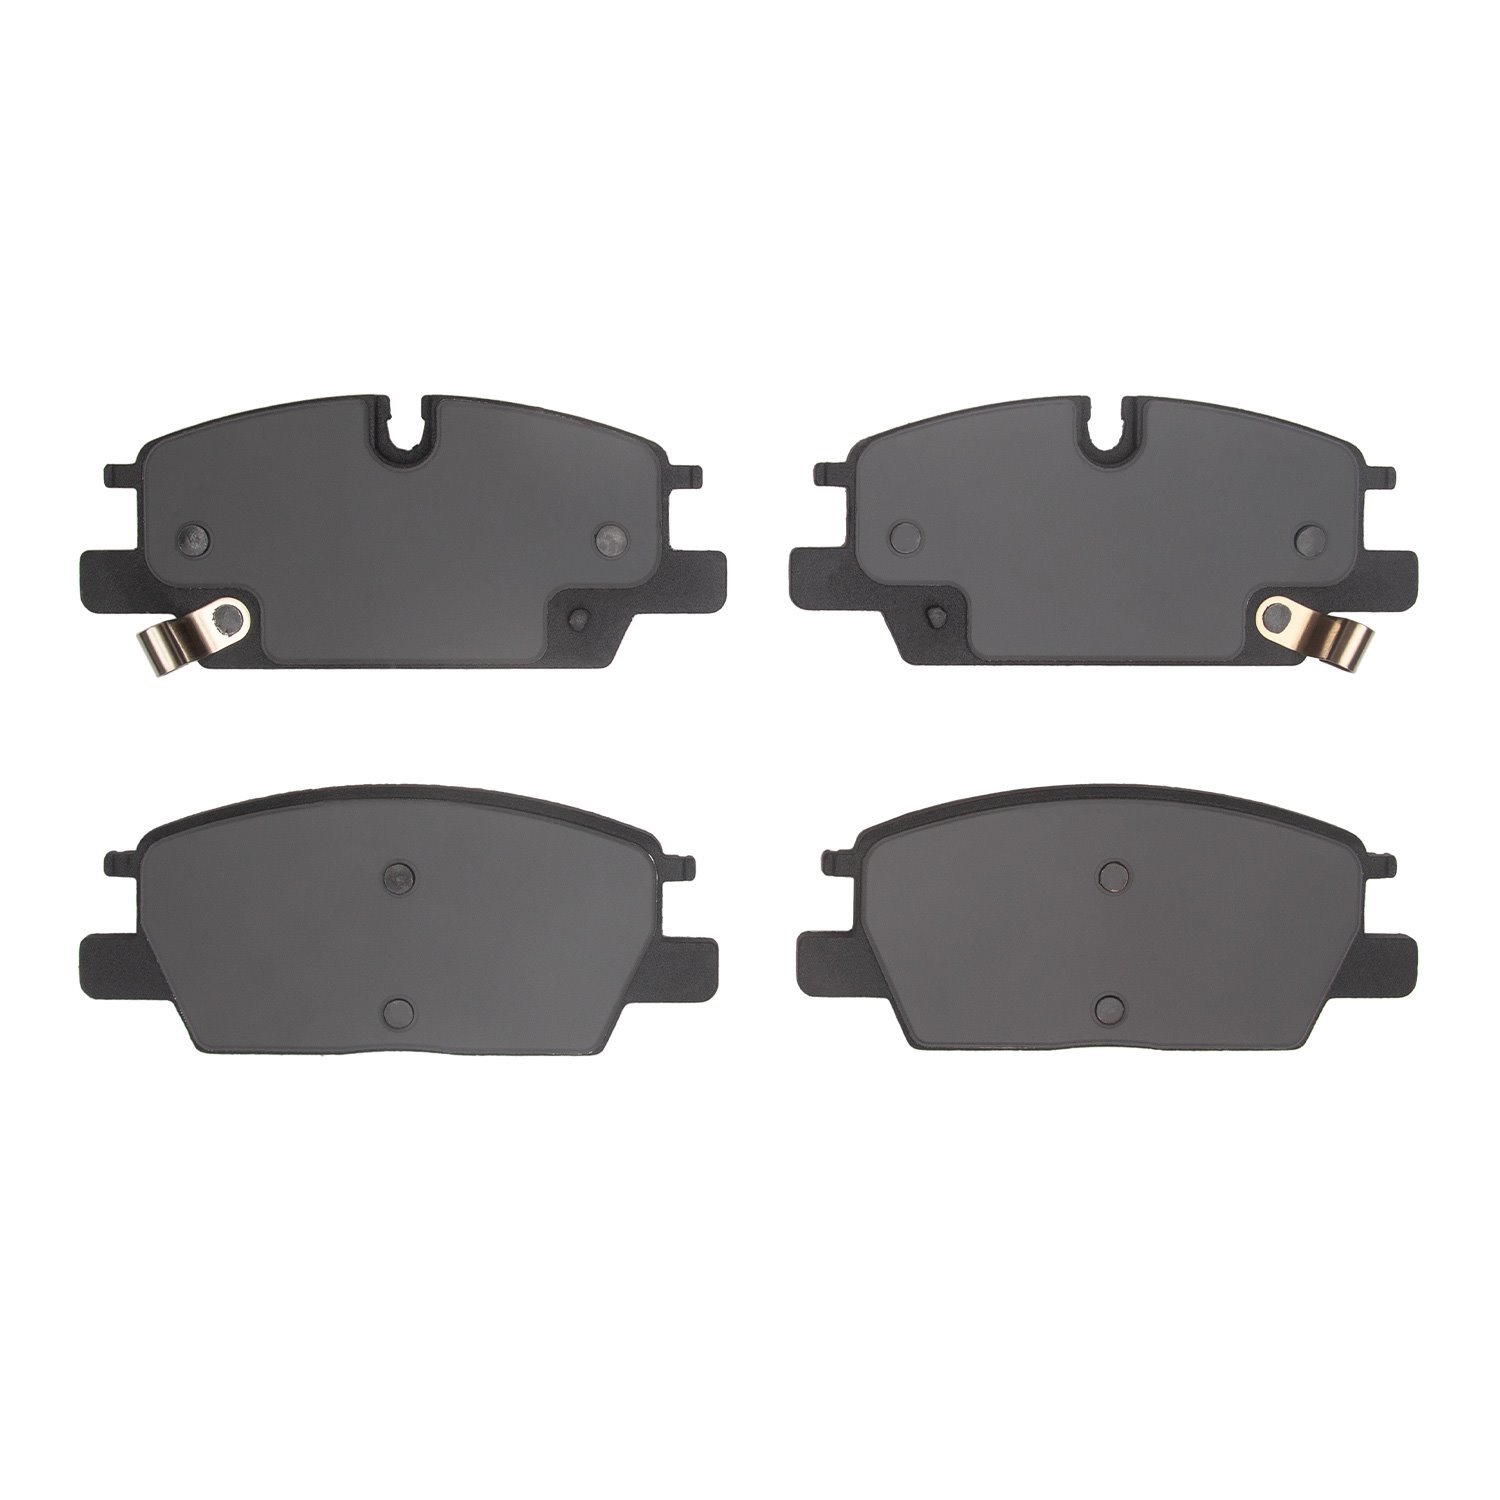 1551-2345-00 5000 Advanced Ceramic Brake Pads, Fits Select GM, Position: Front